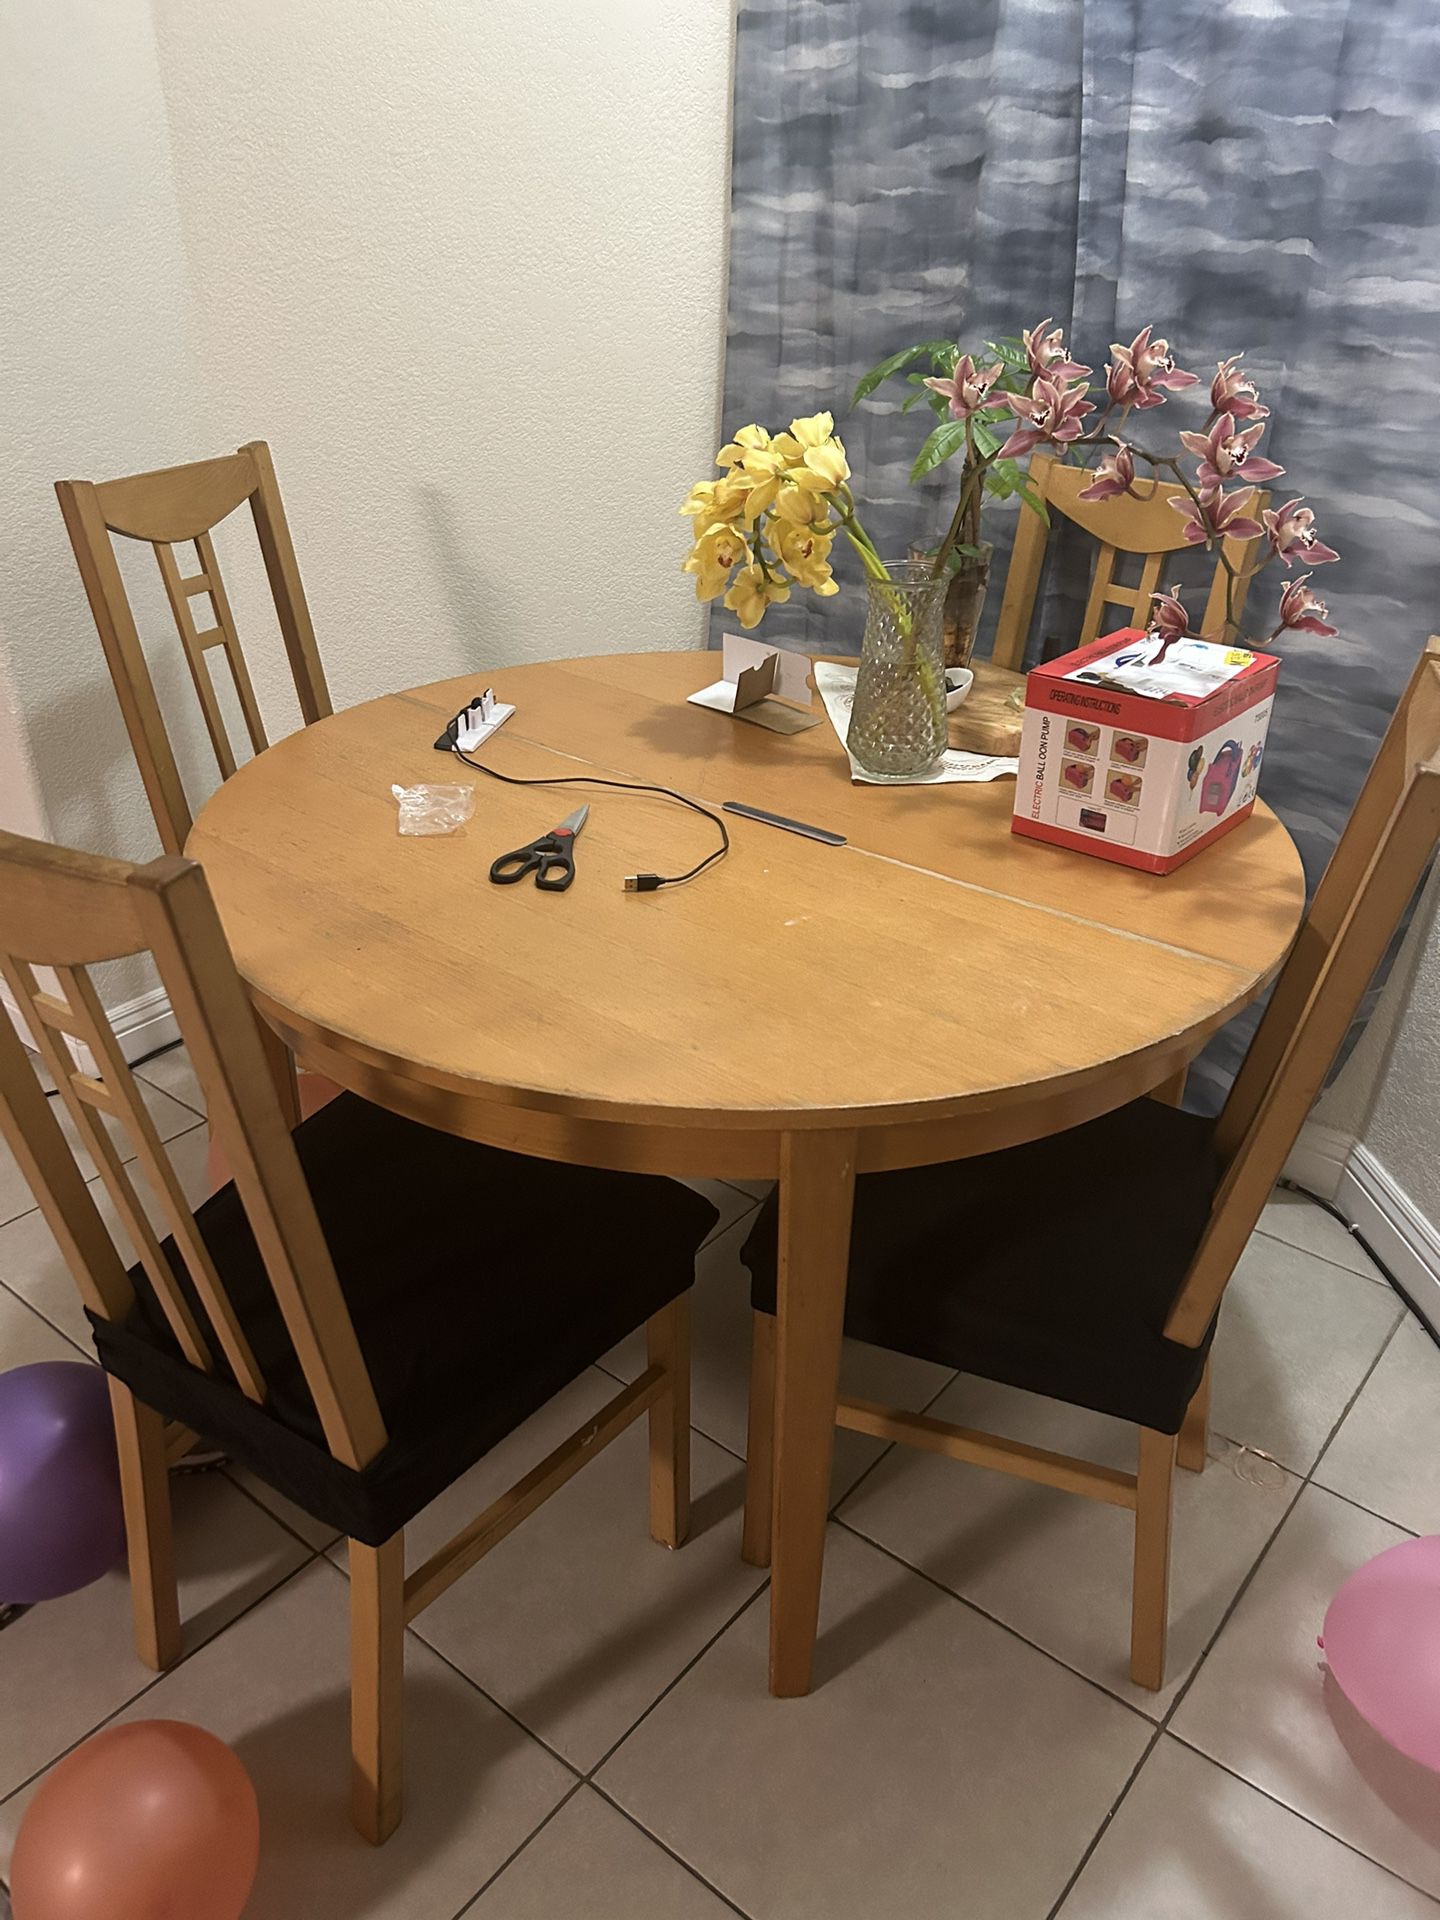 Dining Table With Leaf, 4 chairs, & 2 Sets Of Seat Covers